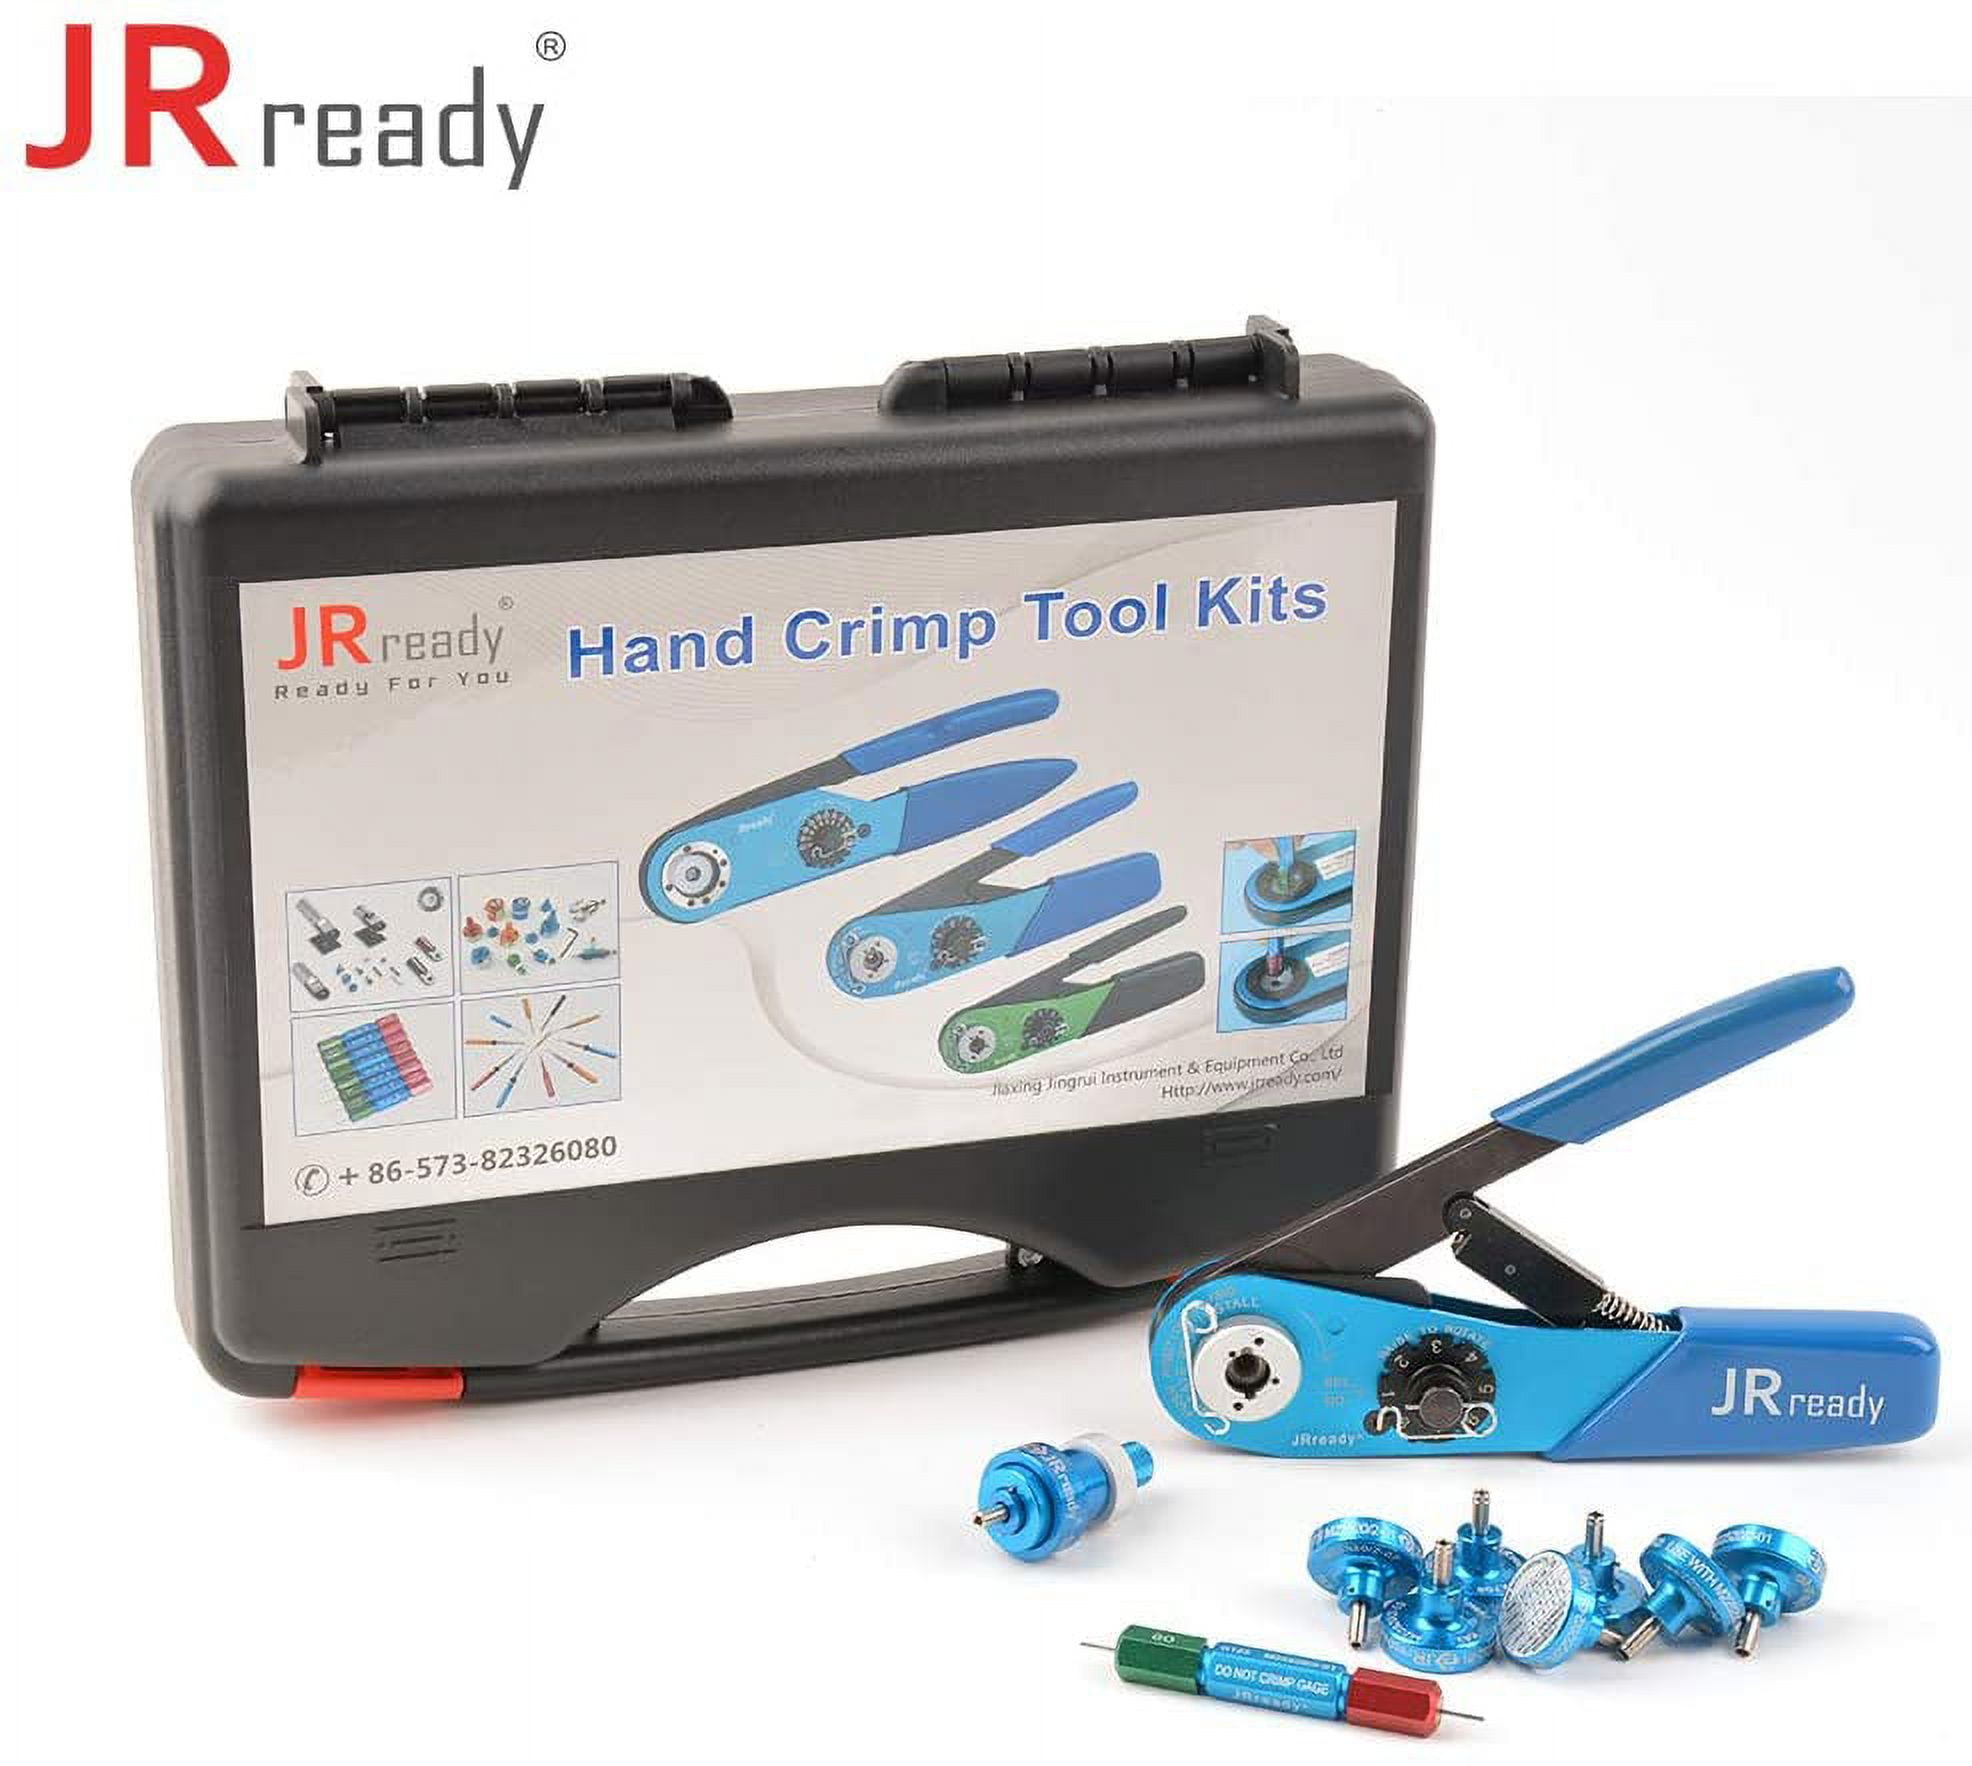 Electronic Systems 2 of Solid Indent Contact Crimp 01 and W1A Aviation ST2060 G125 YJQ Crimper 20 7 Tool Connector Barrel 32awg Positioner Kit for in Gauge JRready Miniature M22520 615717 and